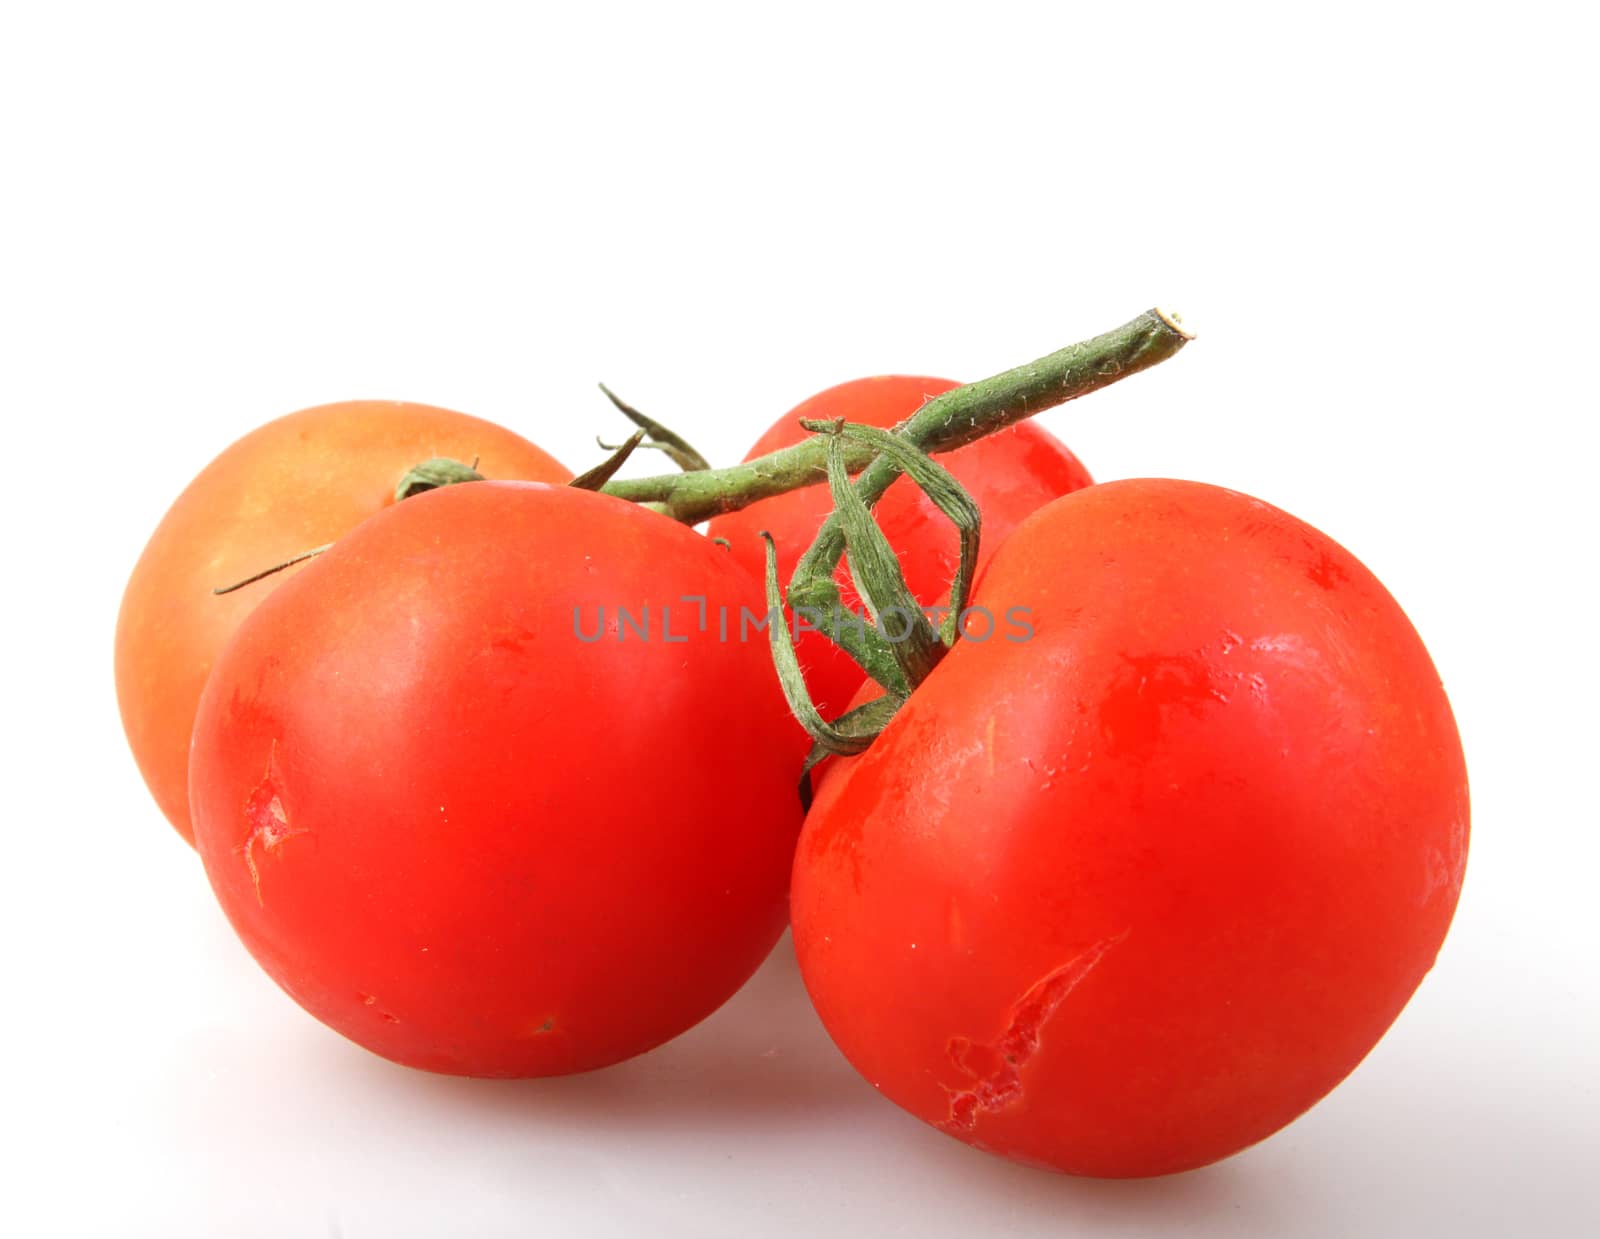 Close-Up Of Red Tomato On White Background